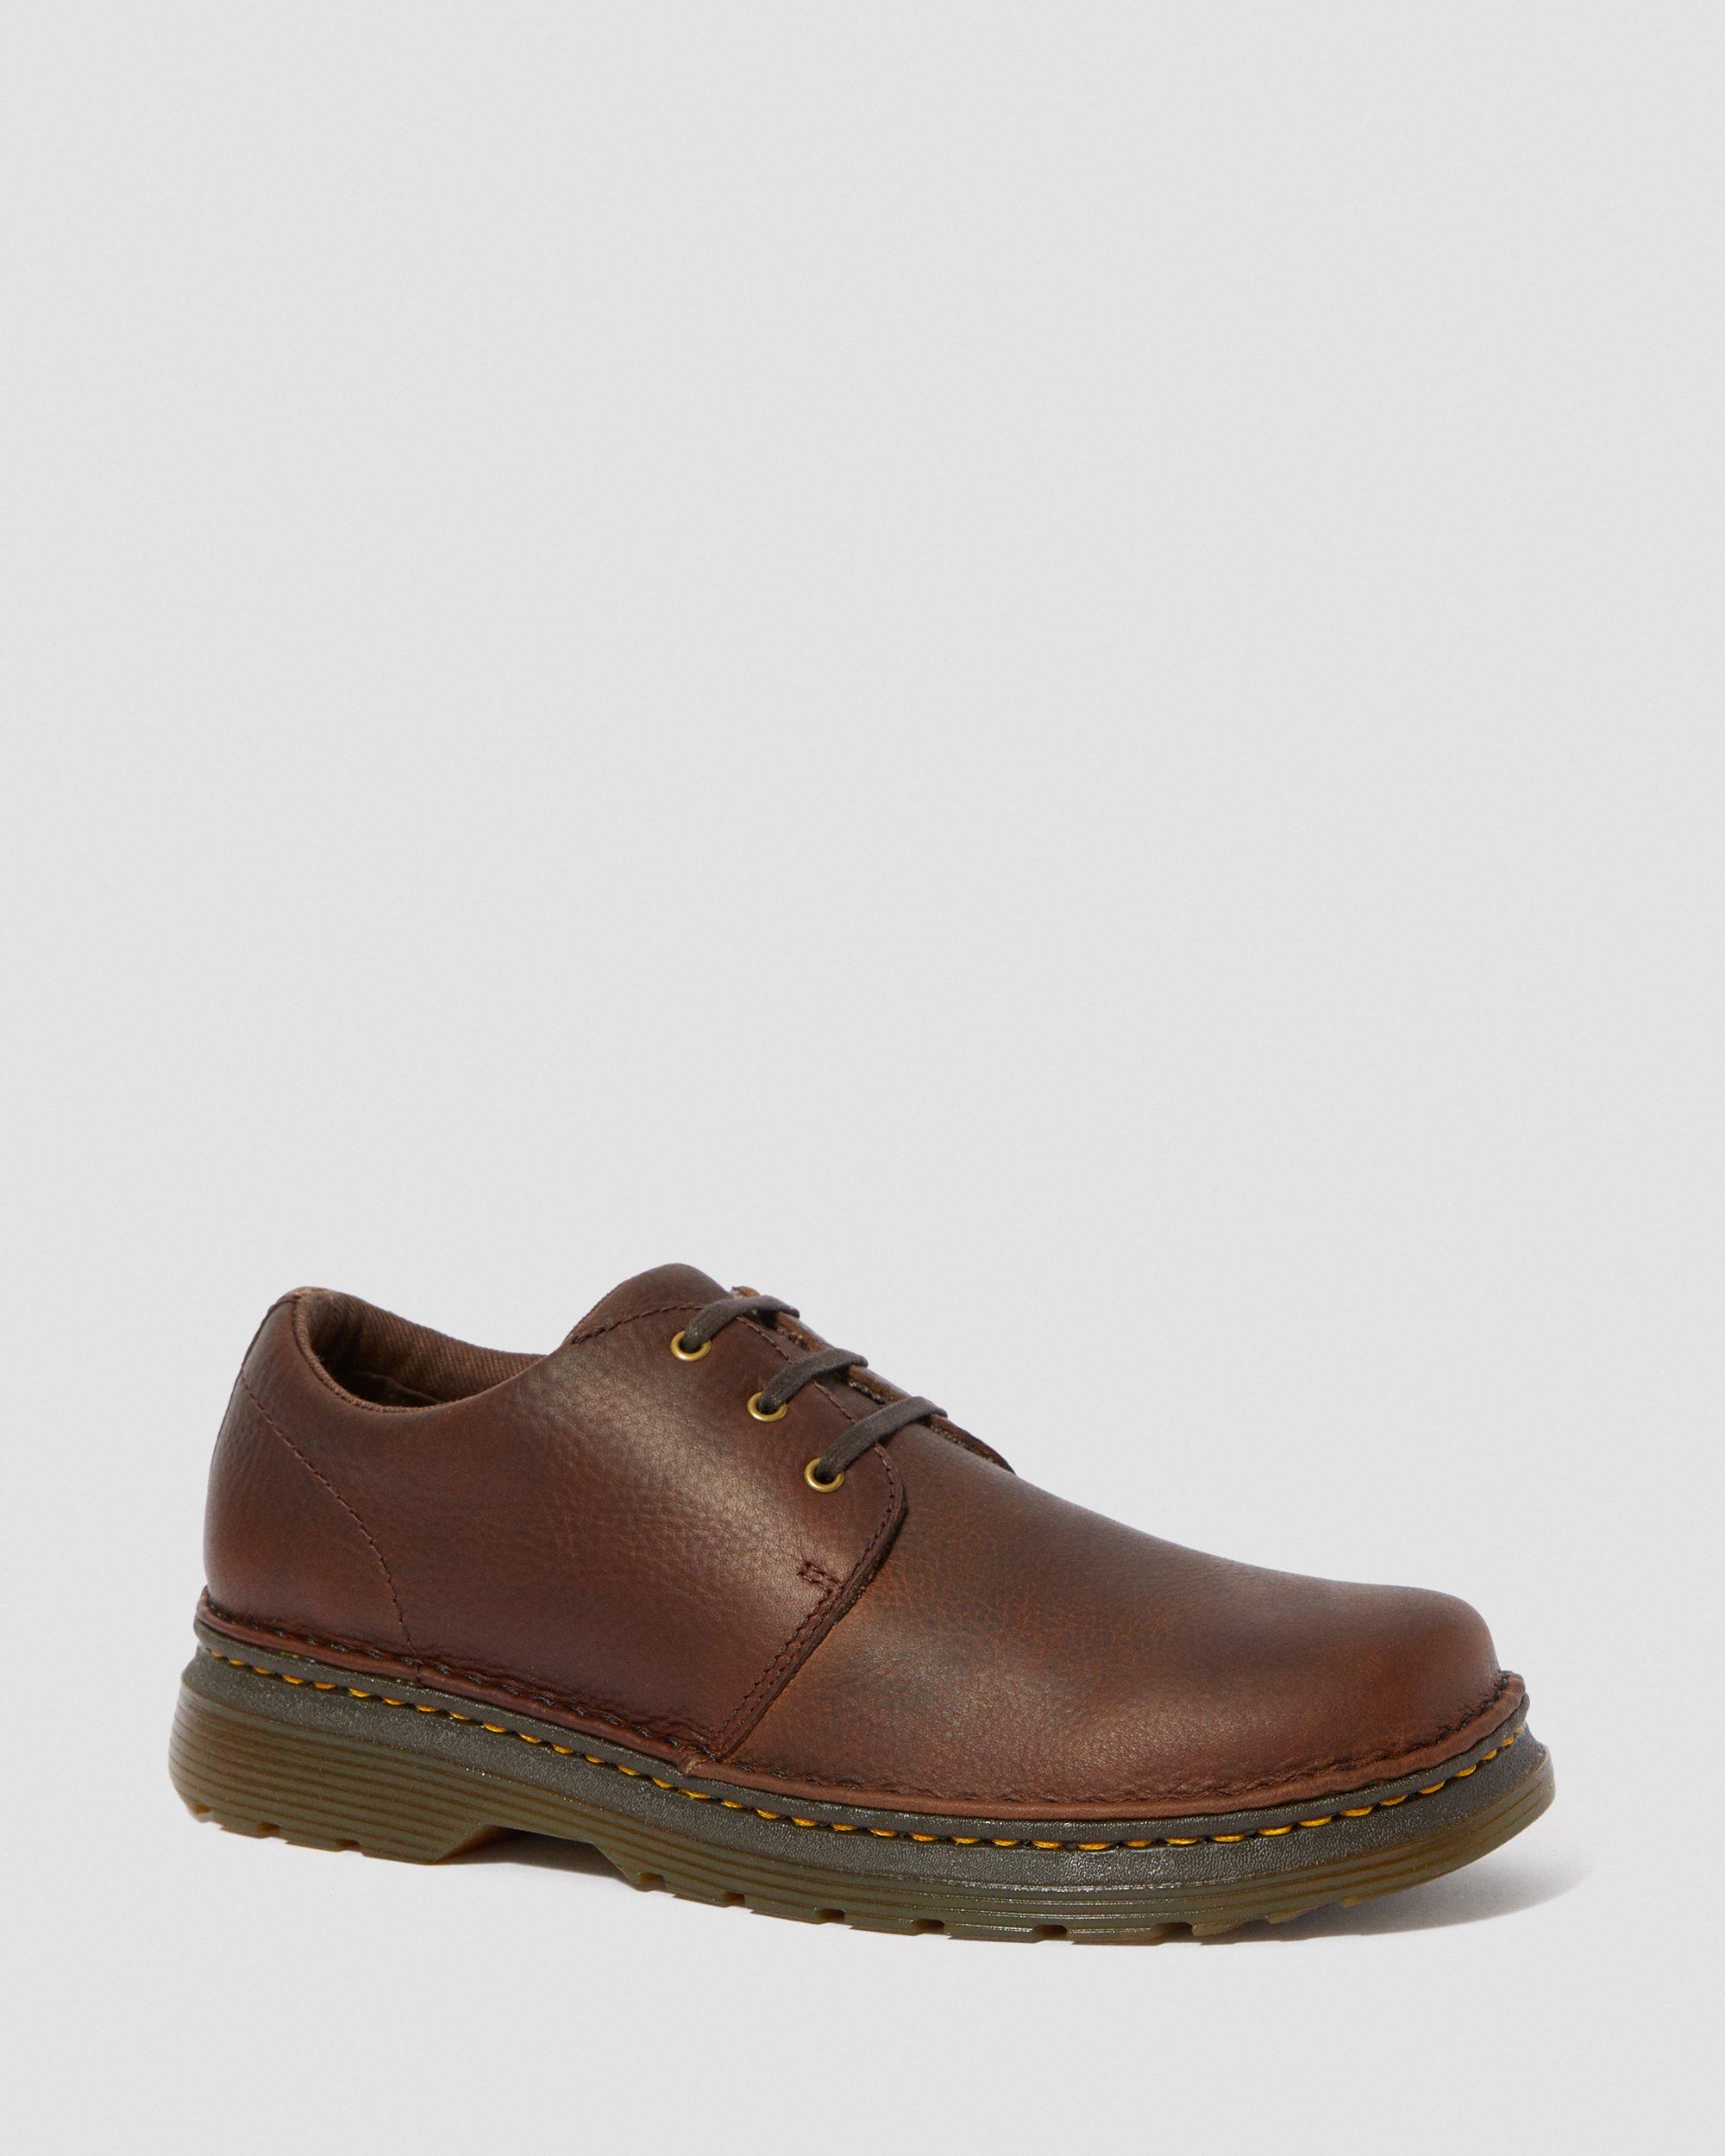 HAZELDON MEN'S GRIZZLY LEATHER CASUAL 